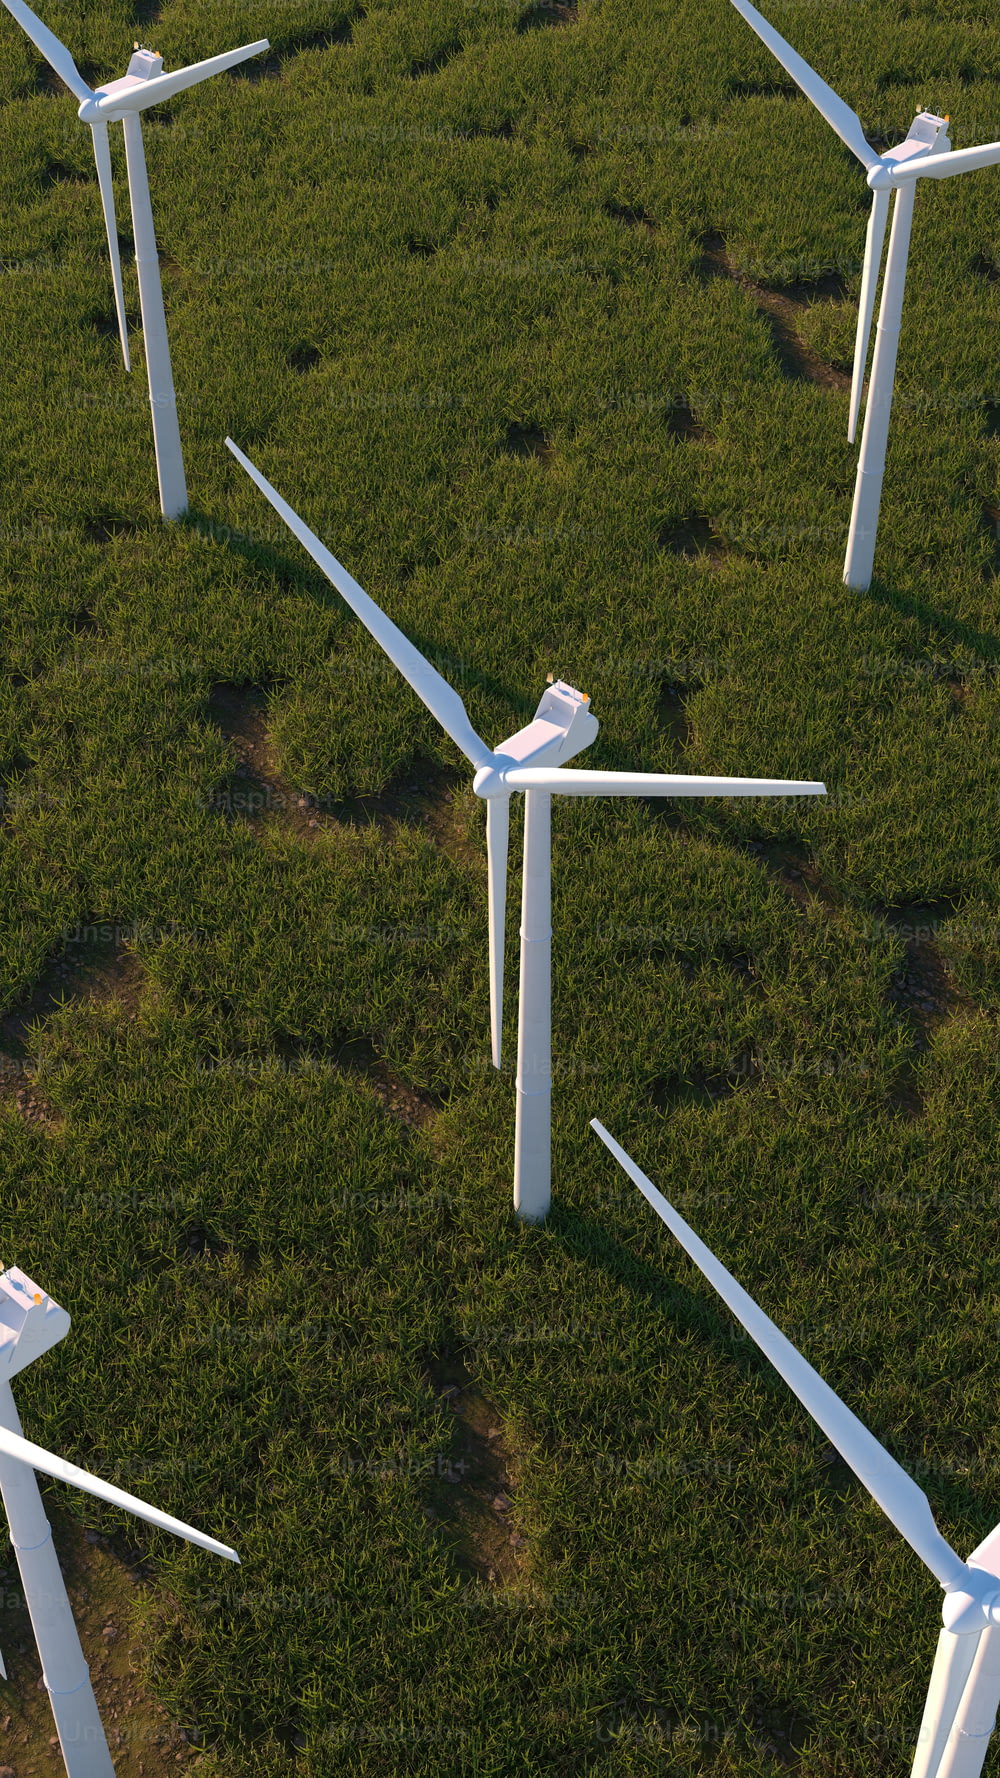 a group of wind turbines in a grassy field